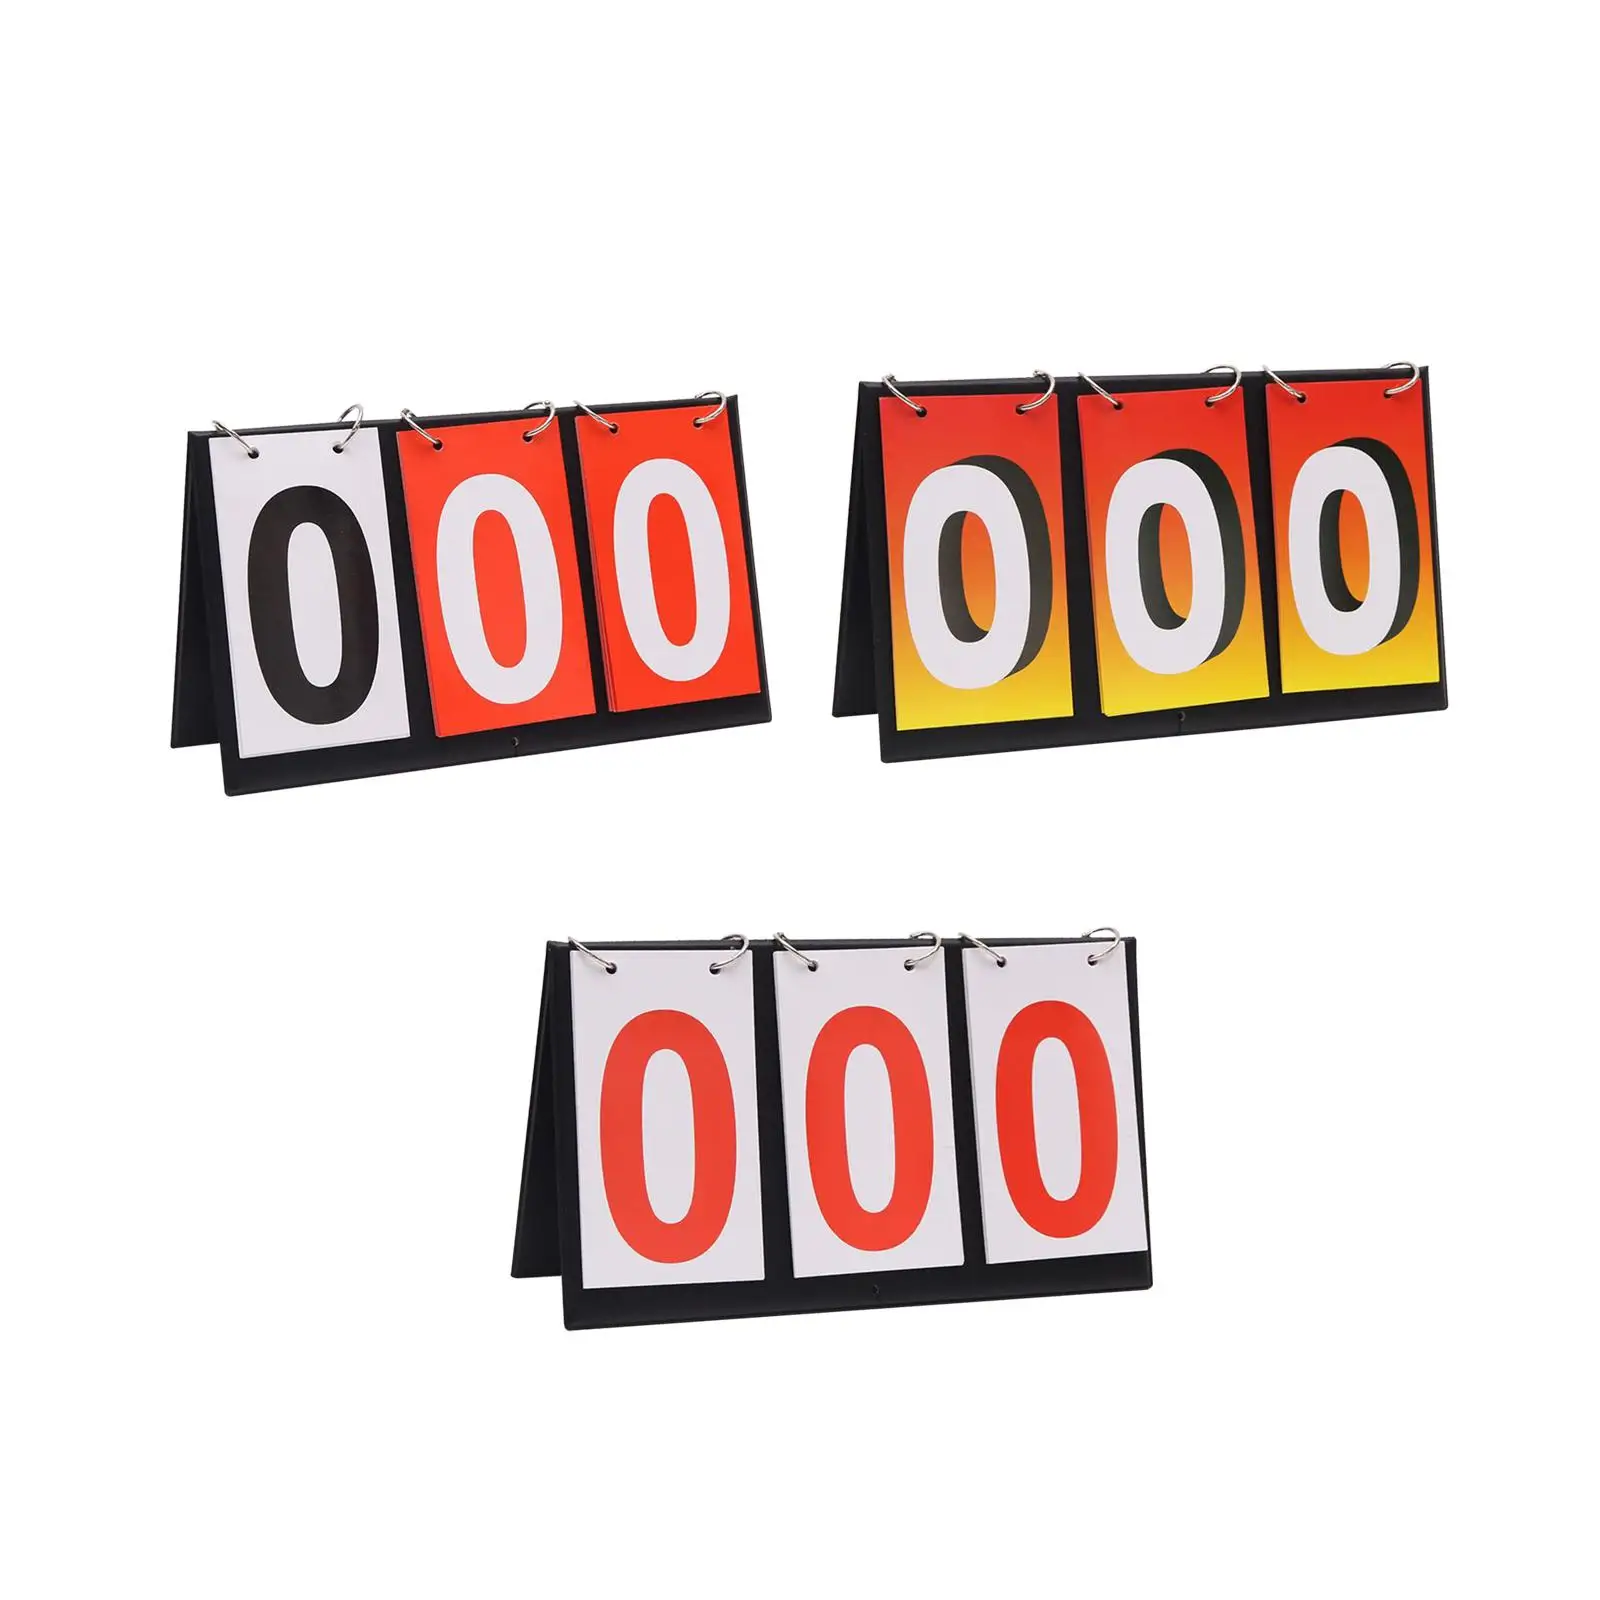 Table Top Scoreboard Soccer Referee Portable Score Keeper for Indoor Outdoor Sports Football Baseball Pingpong Ball Volleyball